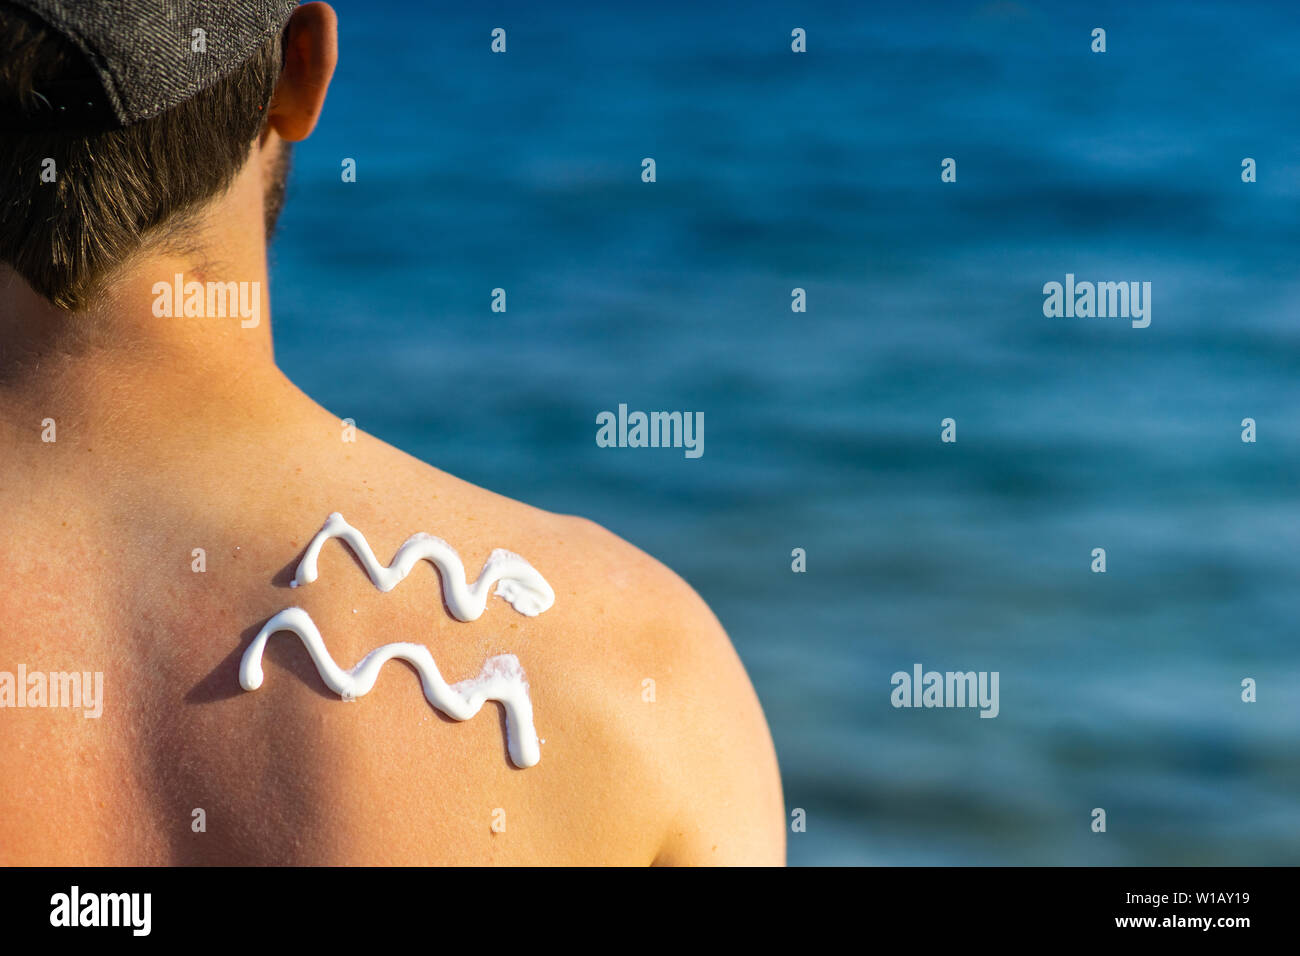 Young Man With Wave Formed Suncream On His Shoulder Standing At The Beach Looking Over The Sea Stock Photo Alamy